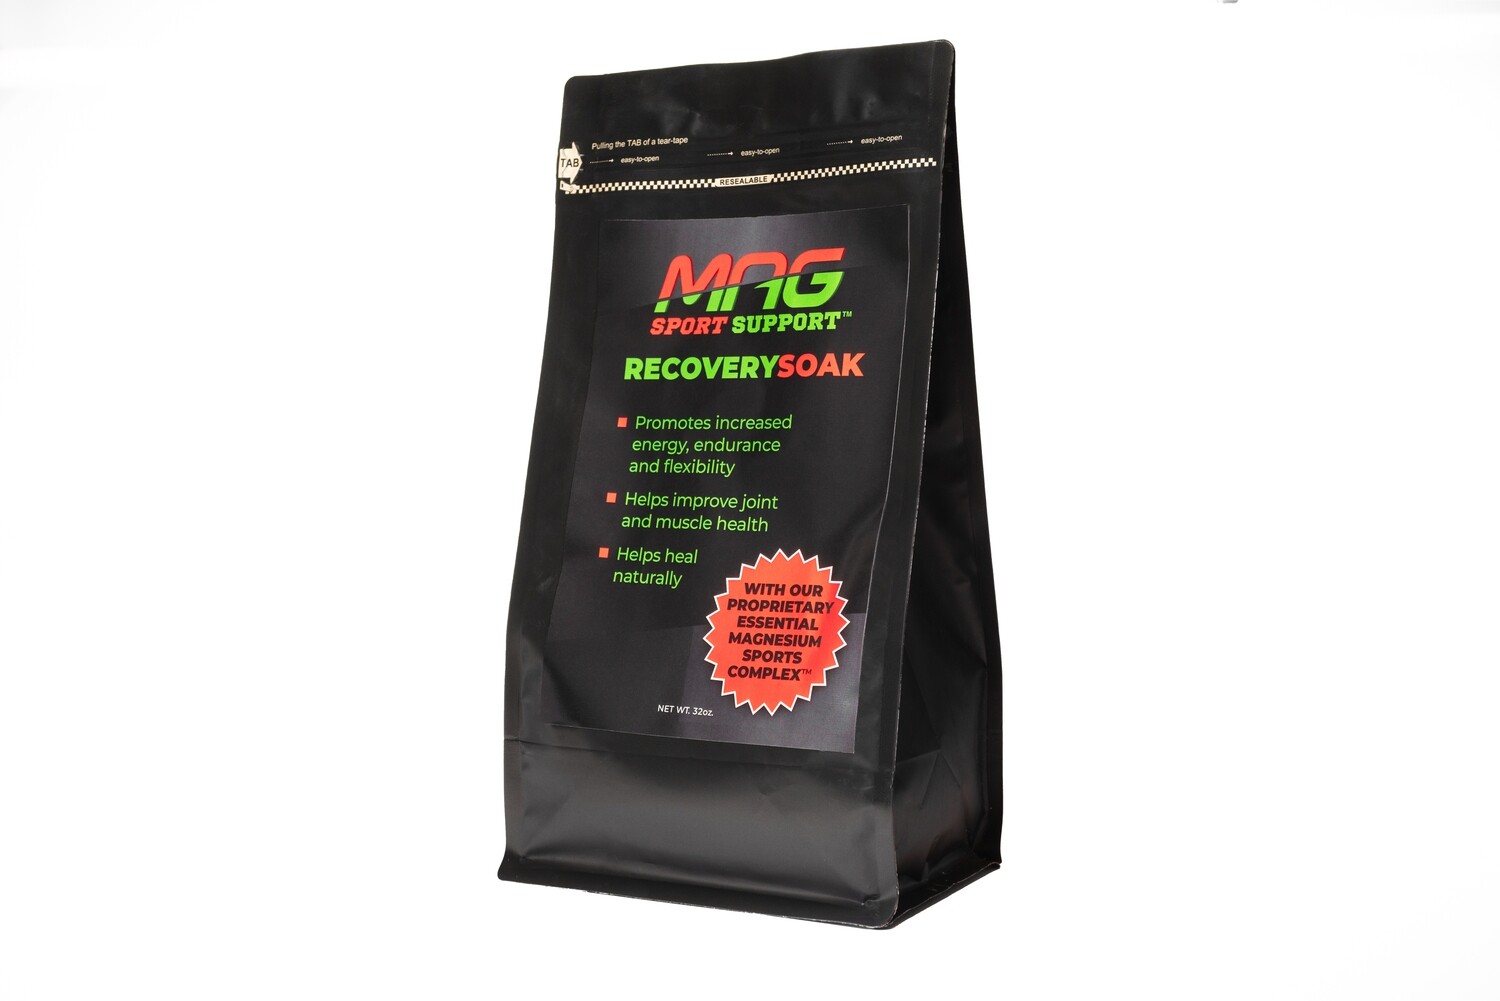 MAG Sport Support Recovery Soak